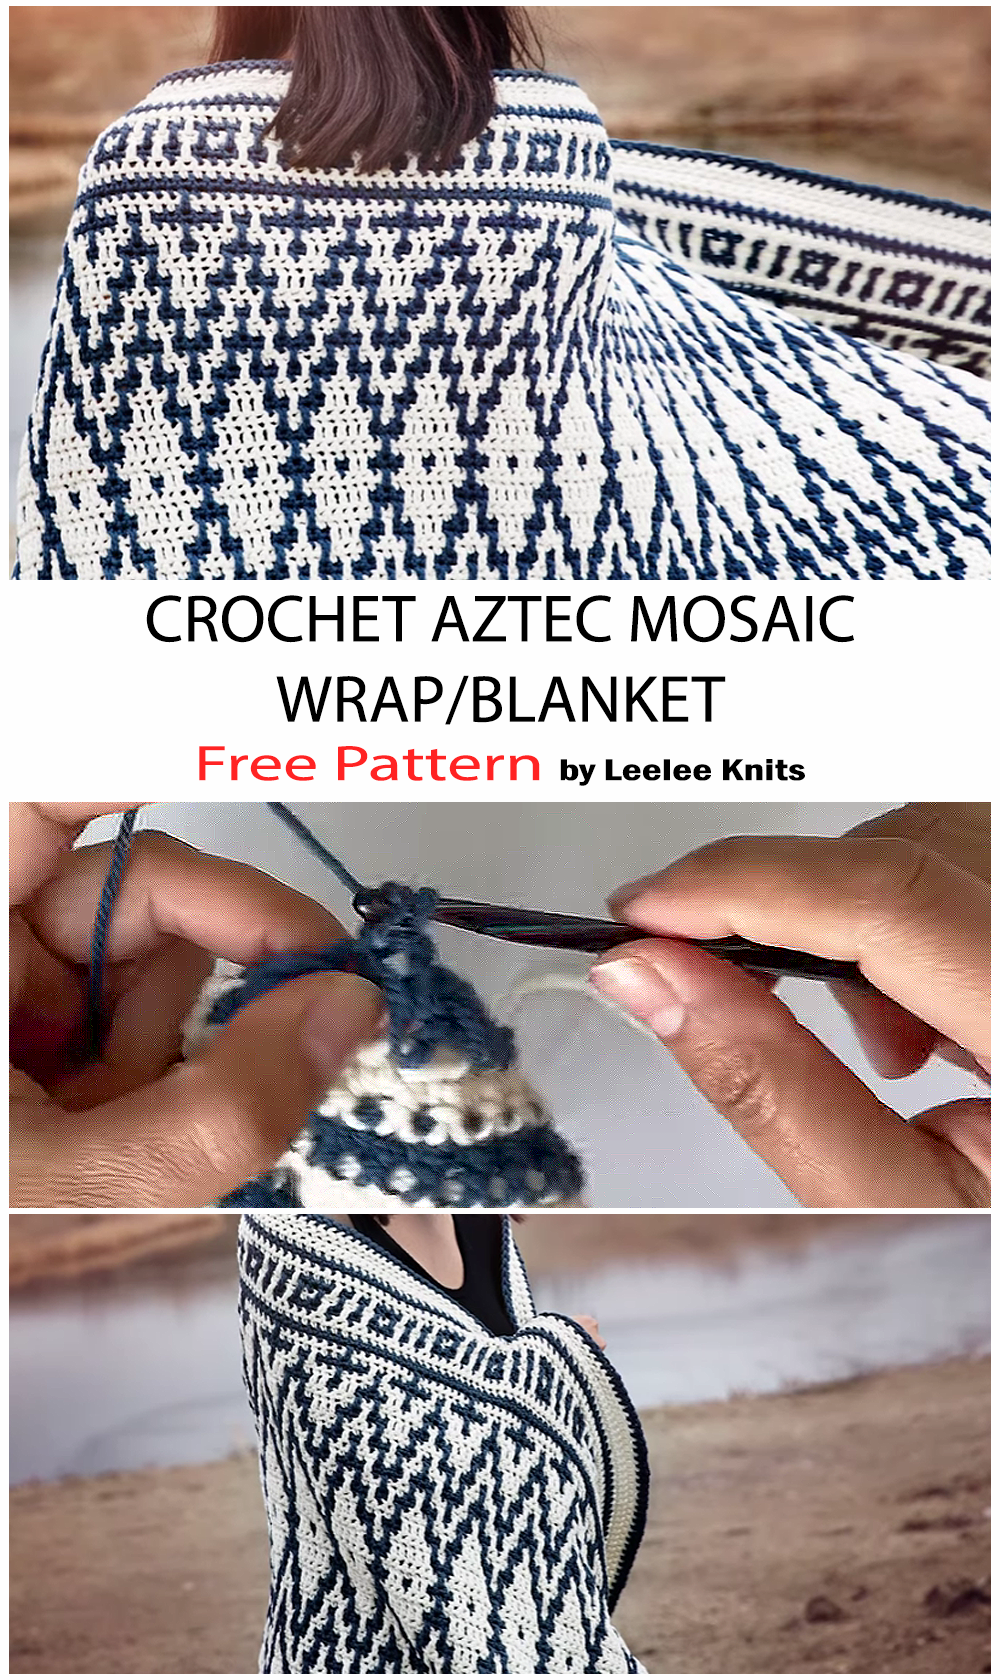 How To Crochet Mosaic Wrap Blanket - Free Pattern For Beginners